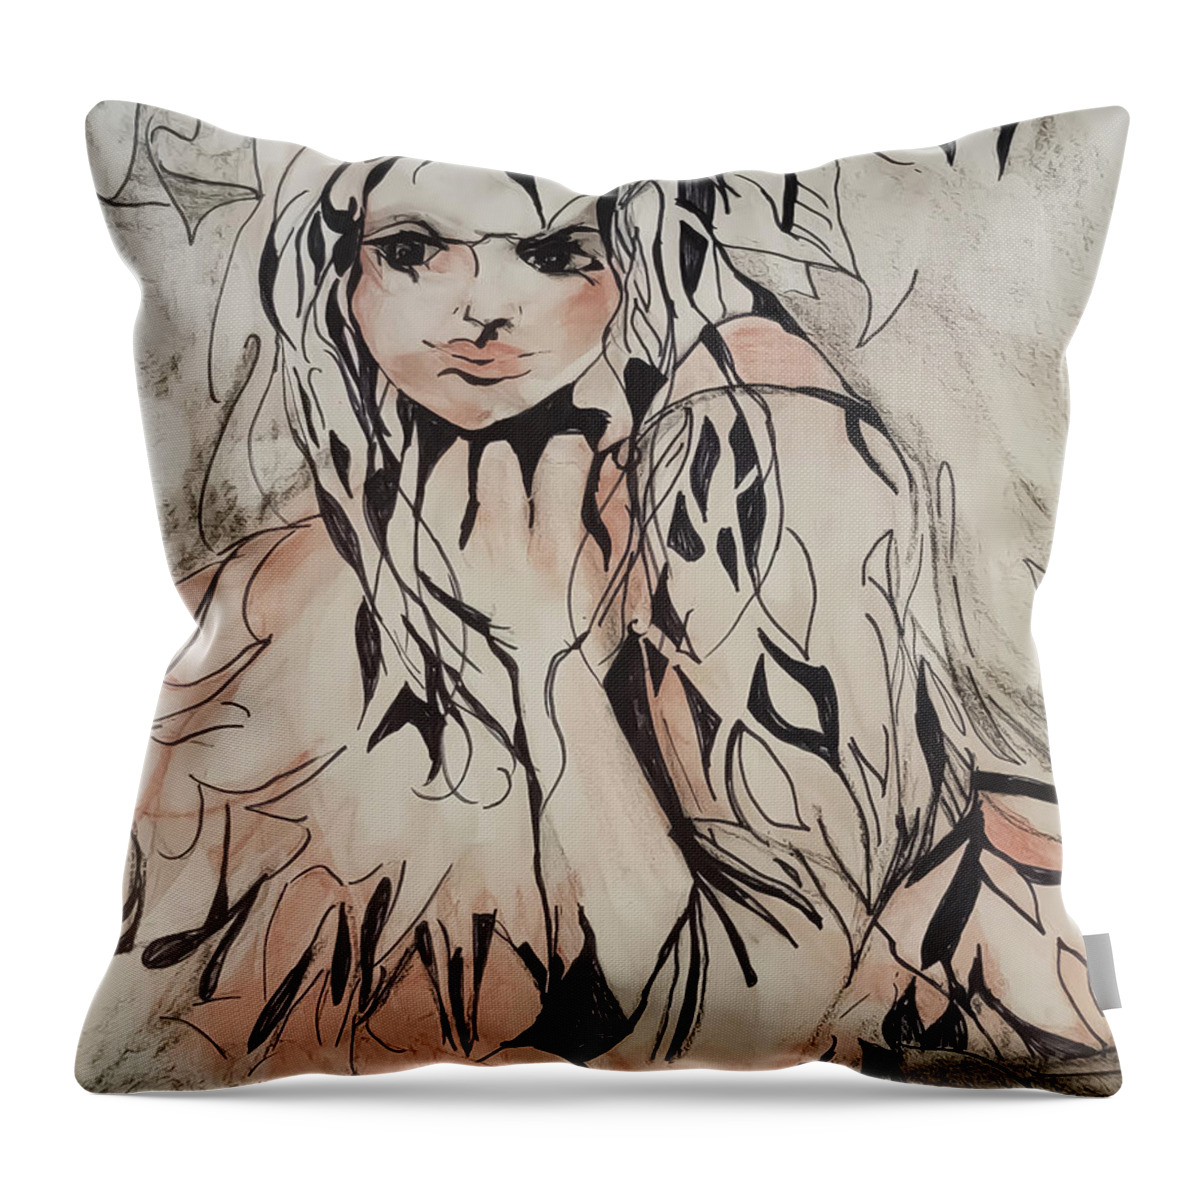 Leaning Throw Pillow featuring the painting Leaning Towards by Lisa Kaiser